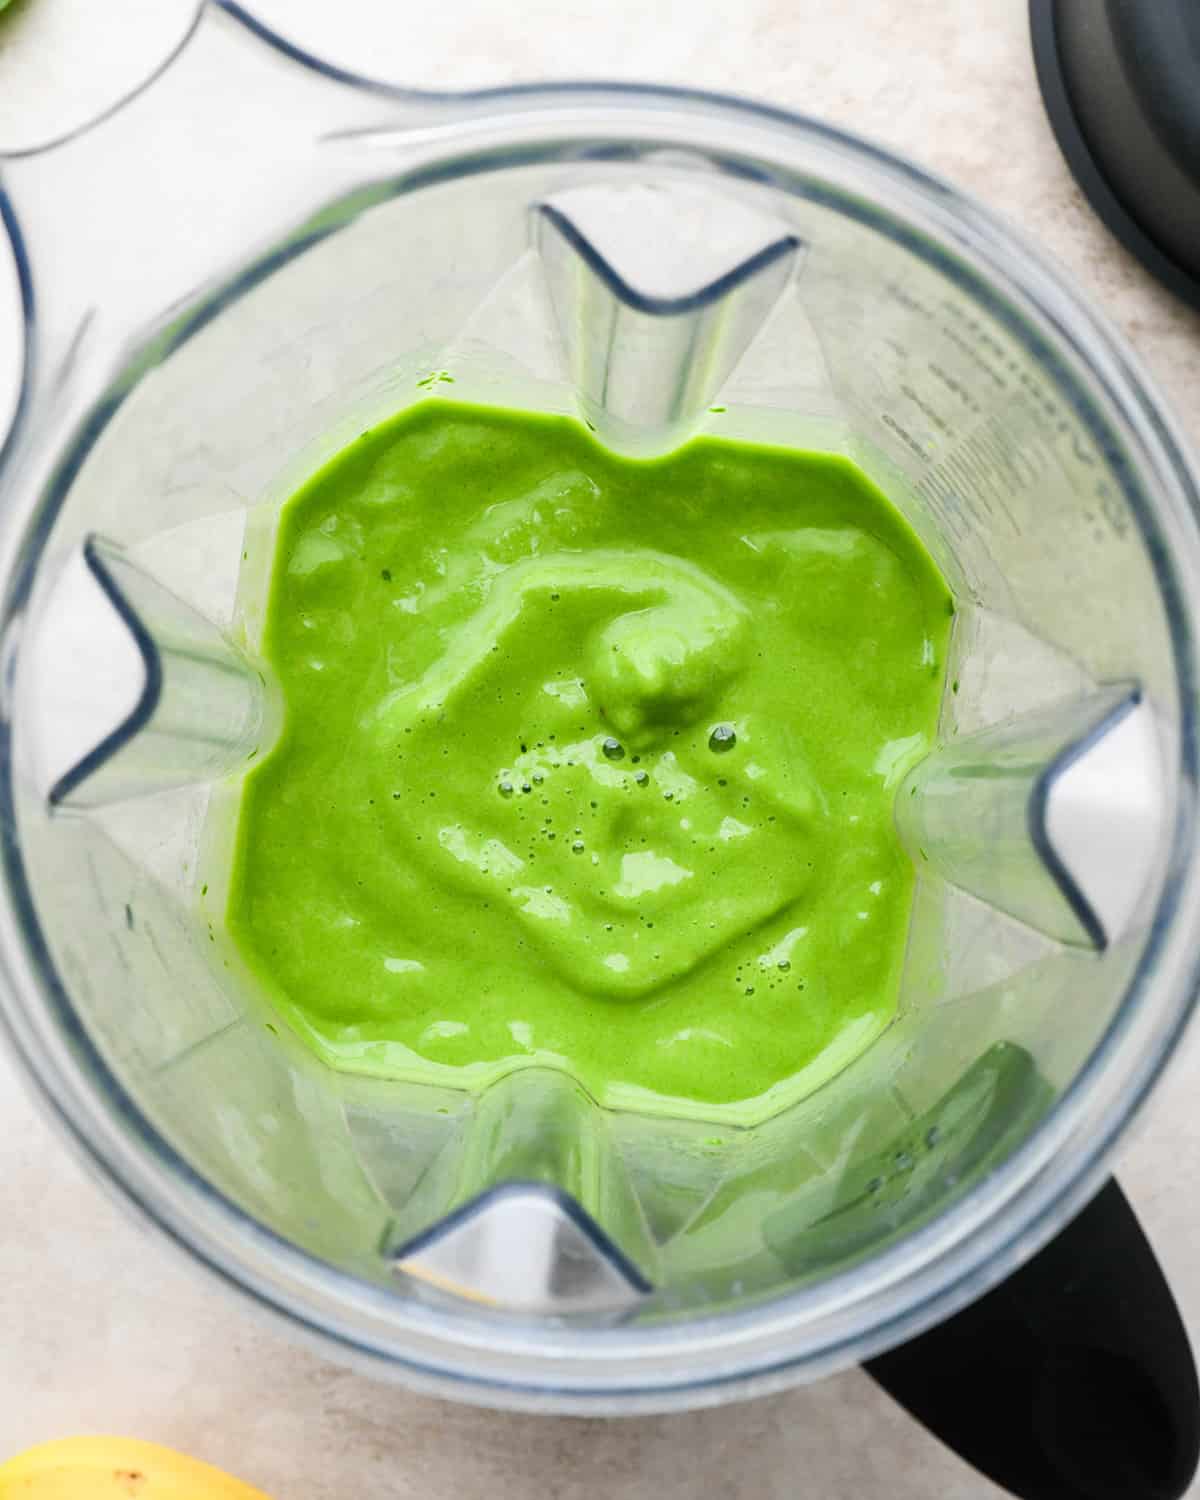 Spinach Smoothie in a blending container after blending